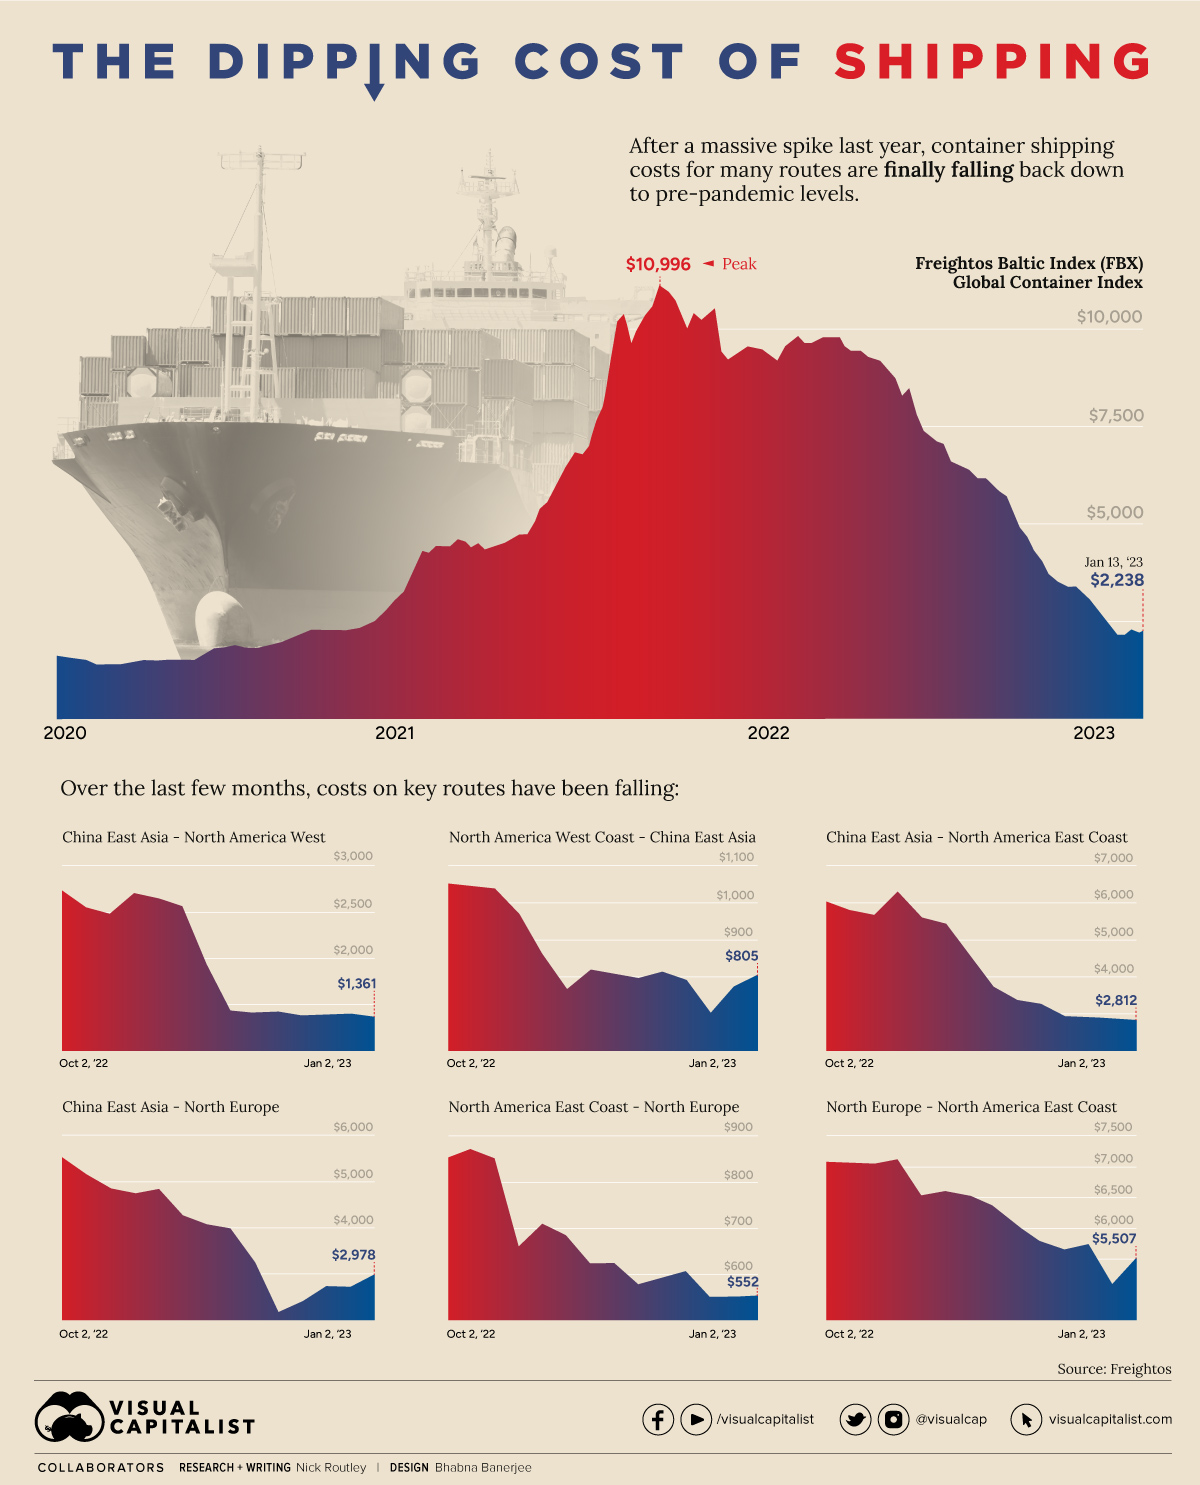 Infographic showing the falling cost of shipping on major routes